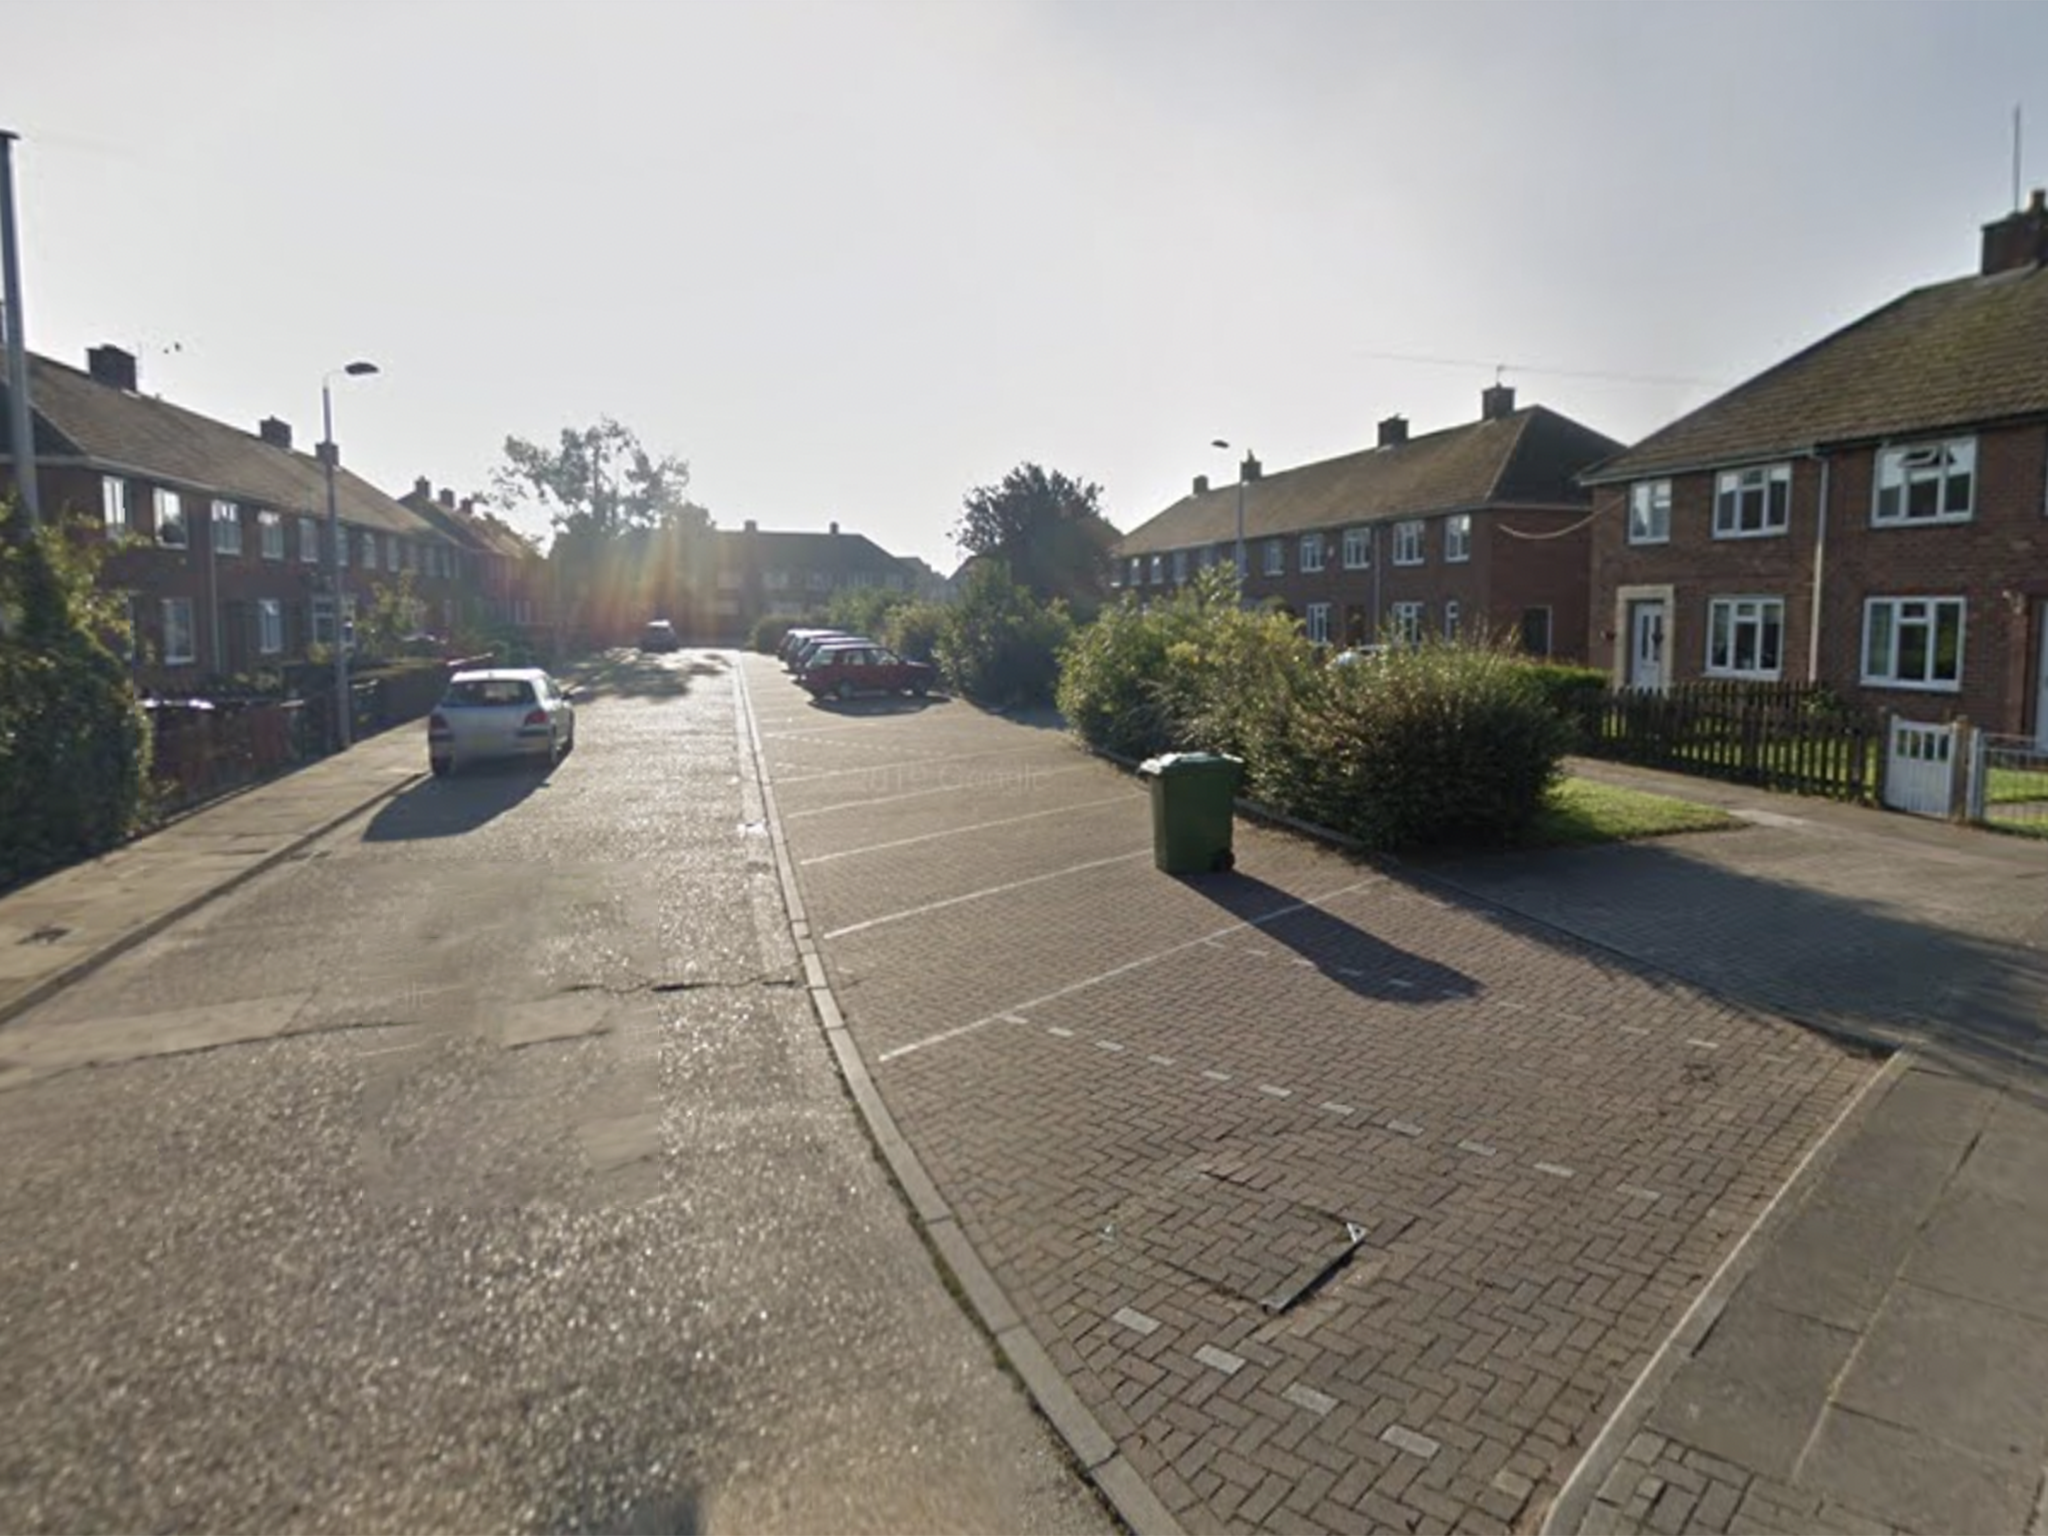 The baby was said to have been found off Winchester Avenue in Grimsby